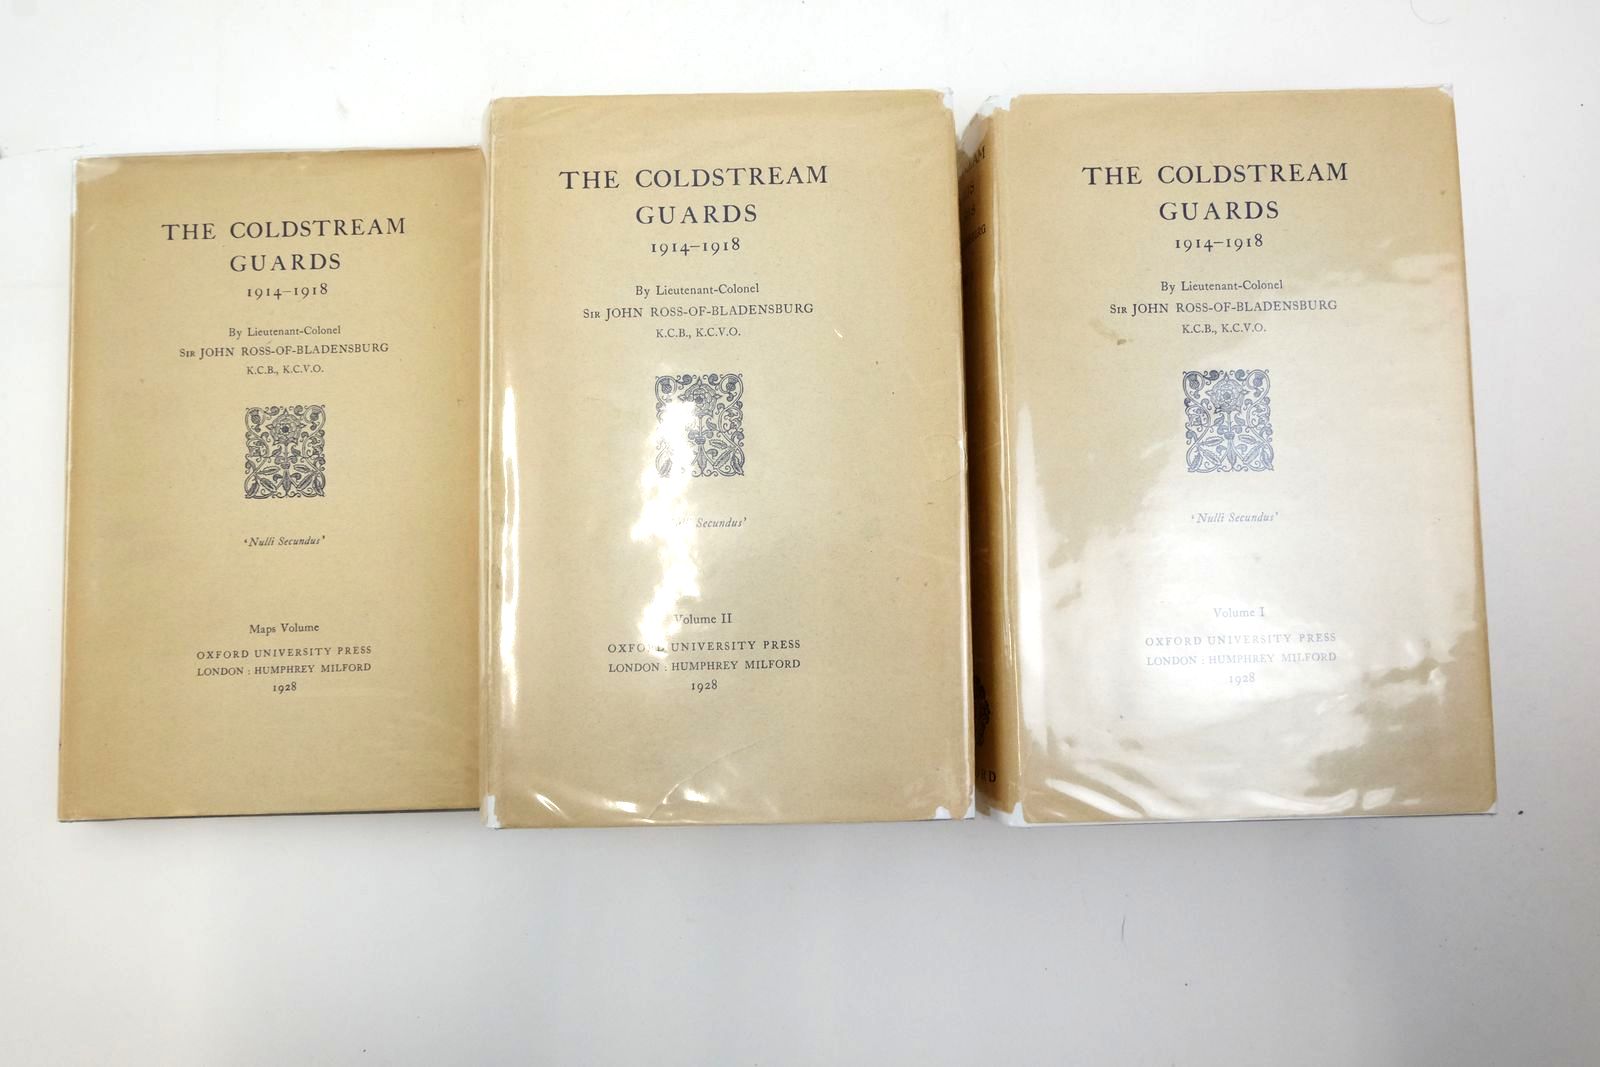 Photo of THE COLDSTREAM GUARDS 1914-1918 (3 VOLUMES) written by Ross-Of, published by Oxford University Press, Humphrey Milford (STOCK CODE: 2137731)  for sale by Stella & Rose's Books